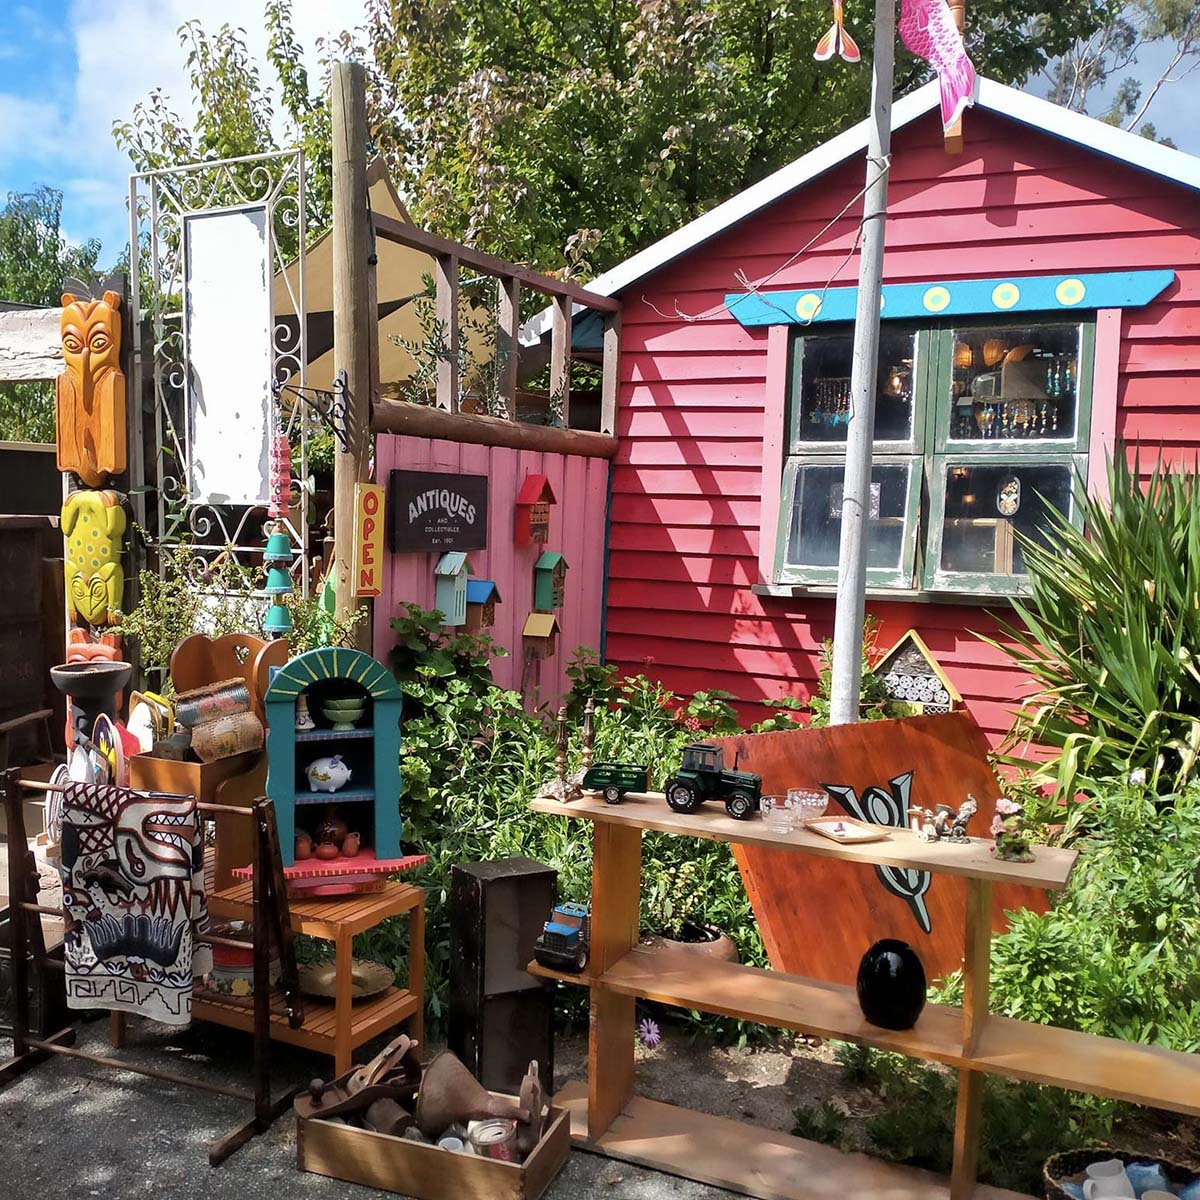 The Red Shed Vintage Shop in Dwellingup